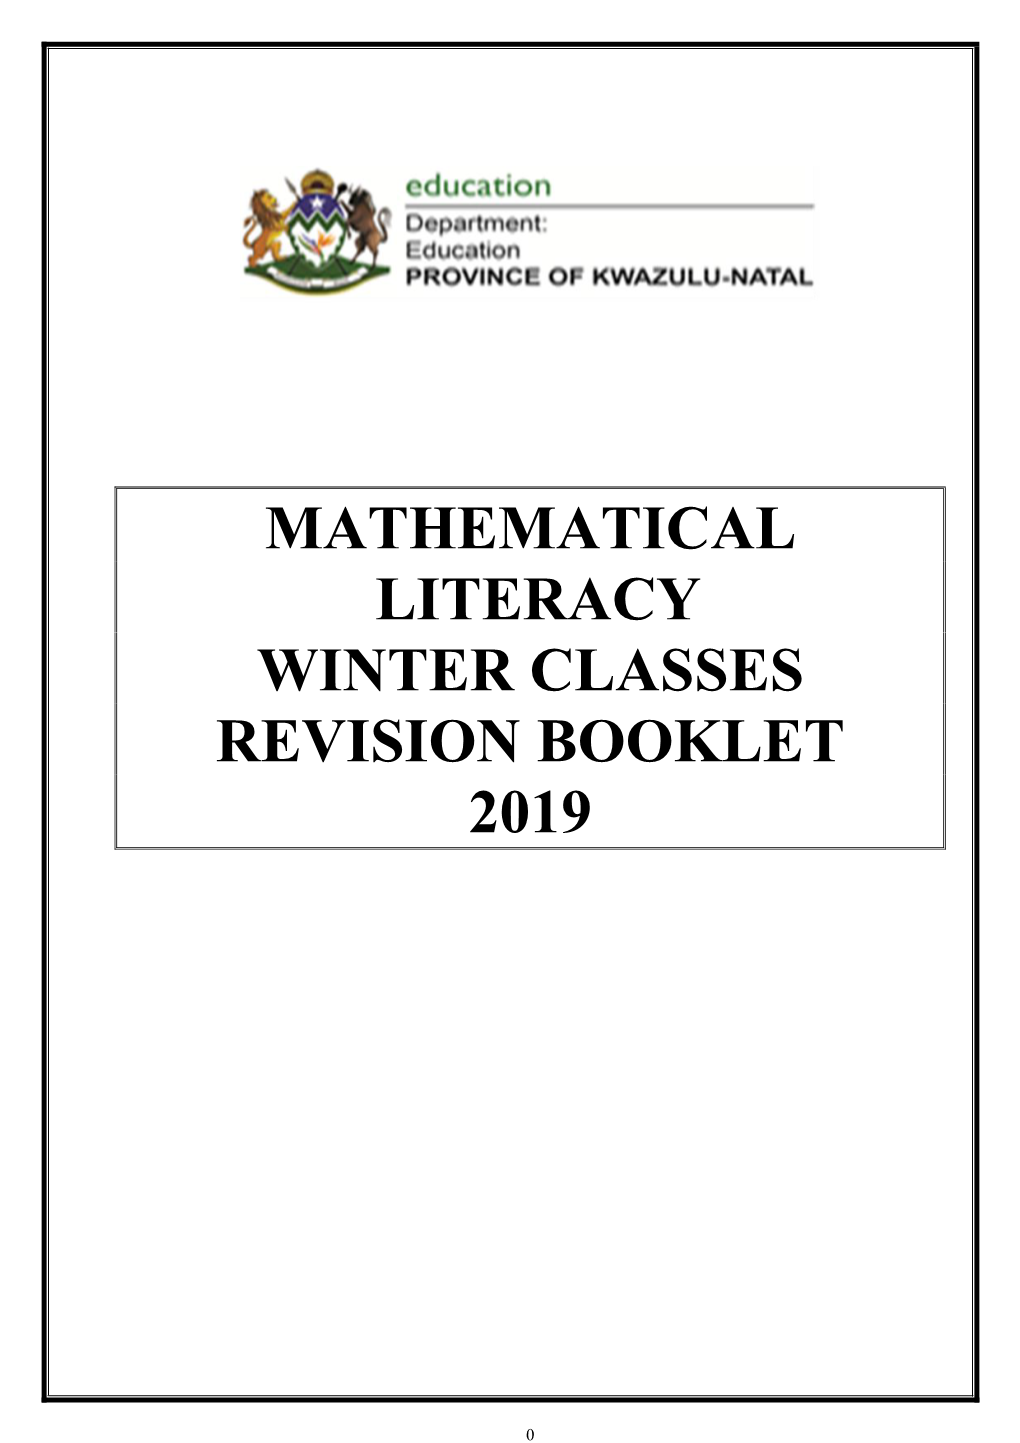 Mathematical Literacy Winter Classes Revision Booklet 2019